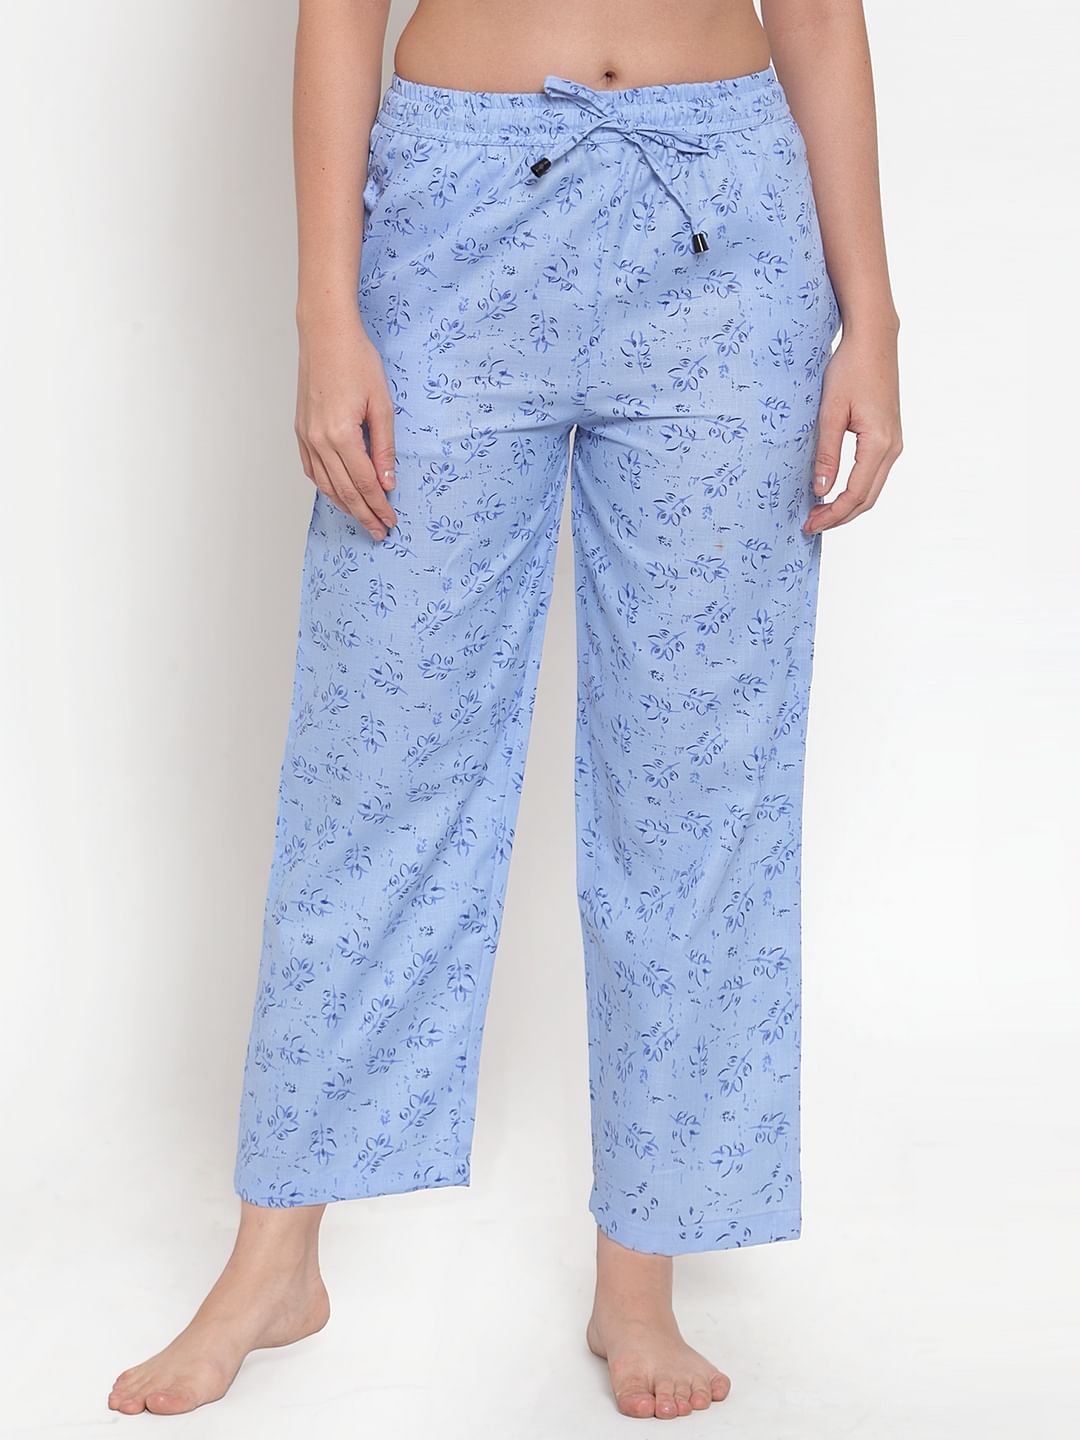 Buy womens Printed cotton pajama lower for women ladies lounge track pants   Women Printed Cotton Track Pant for Women Online at Best Prices in India   JioMart